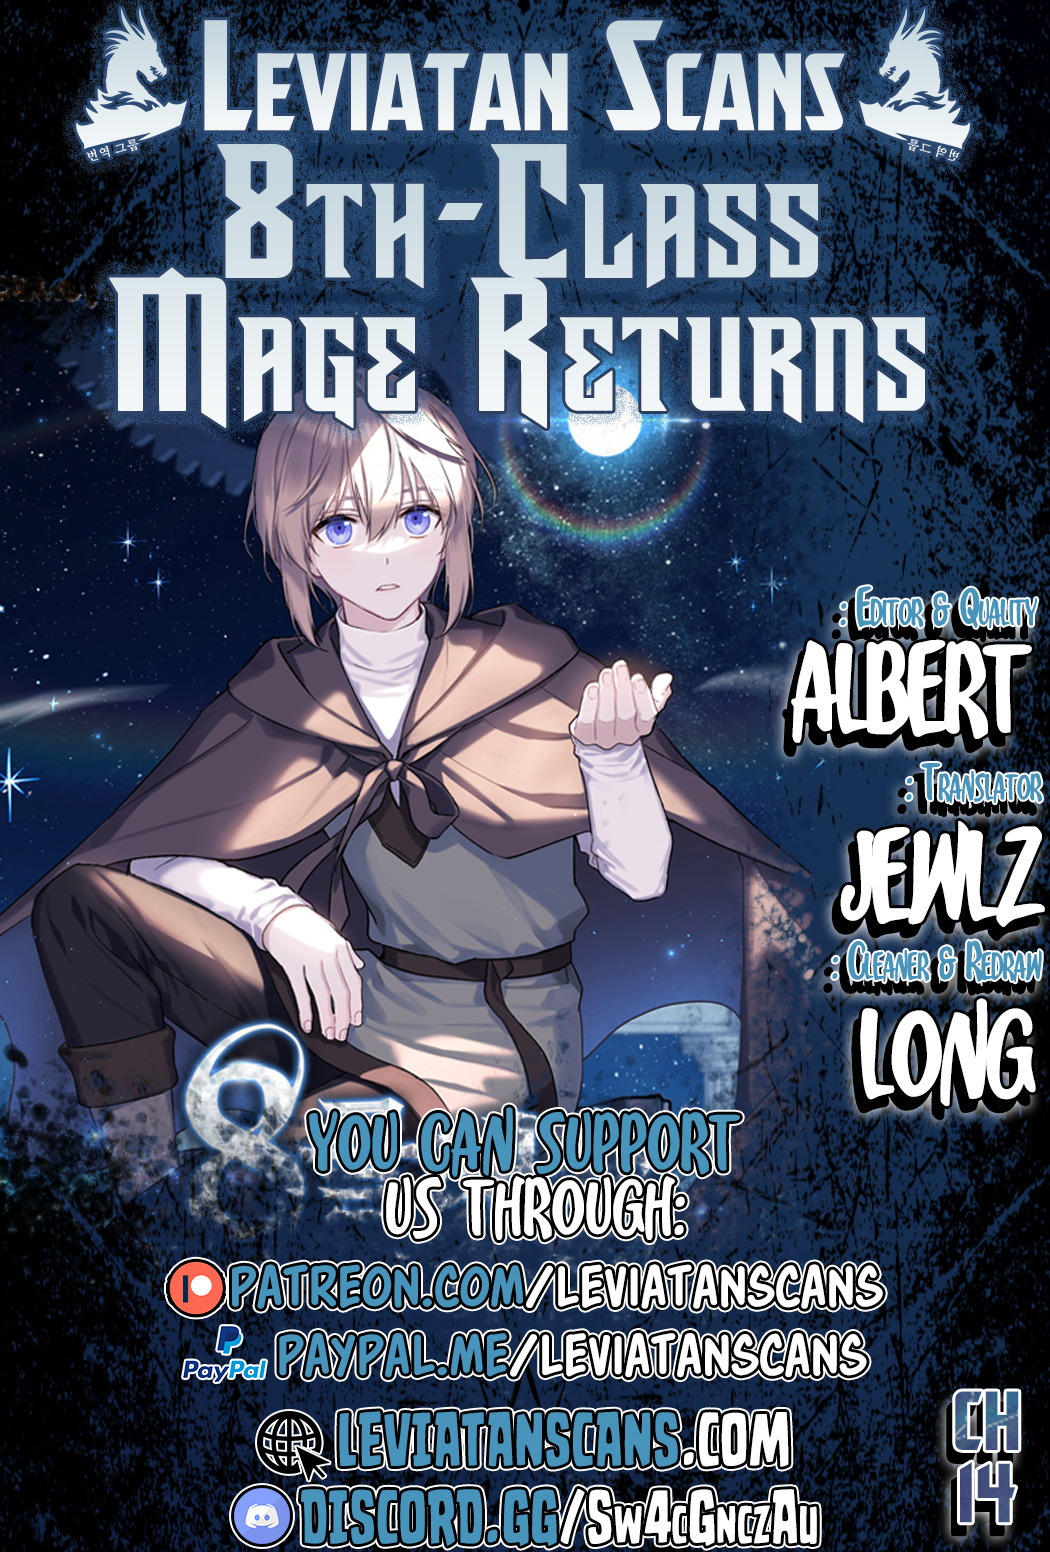 Return of the 8th Class Magician - Chapter 7133 - Image 1